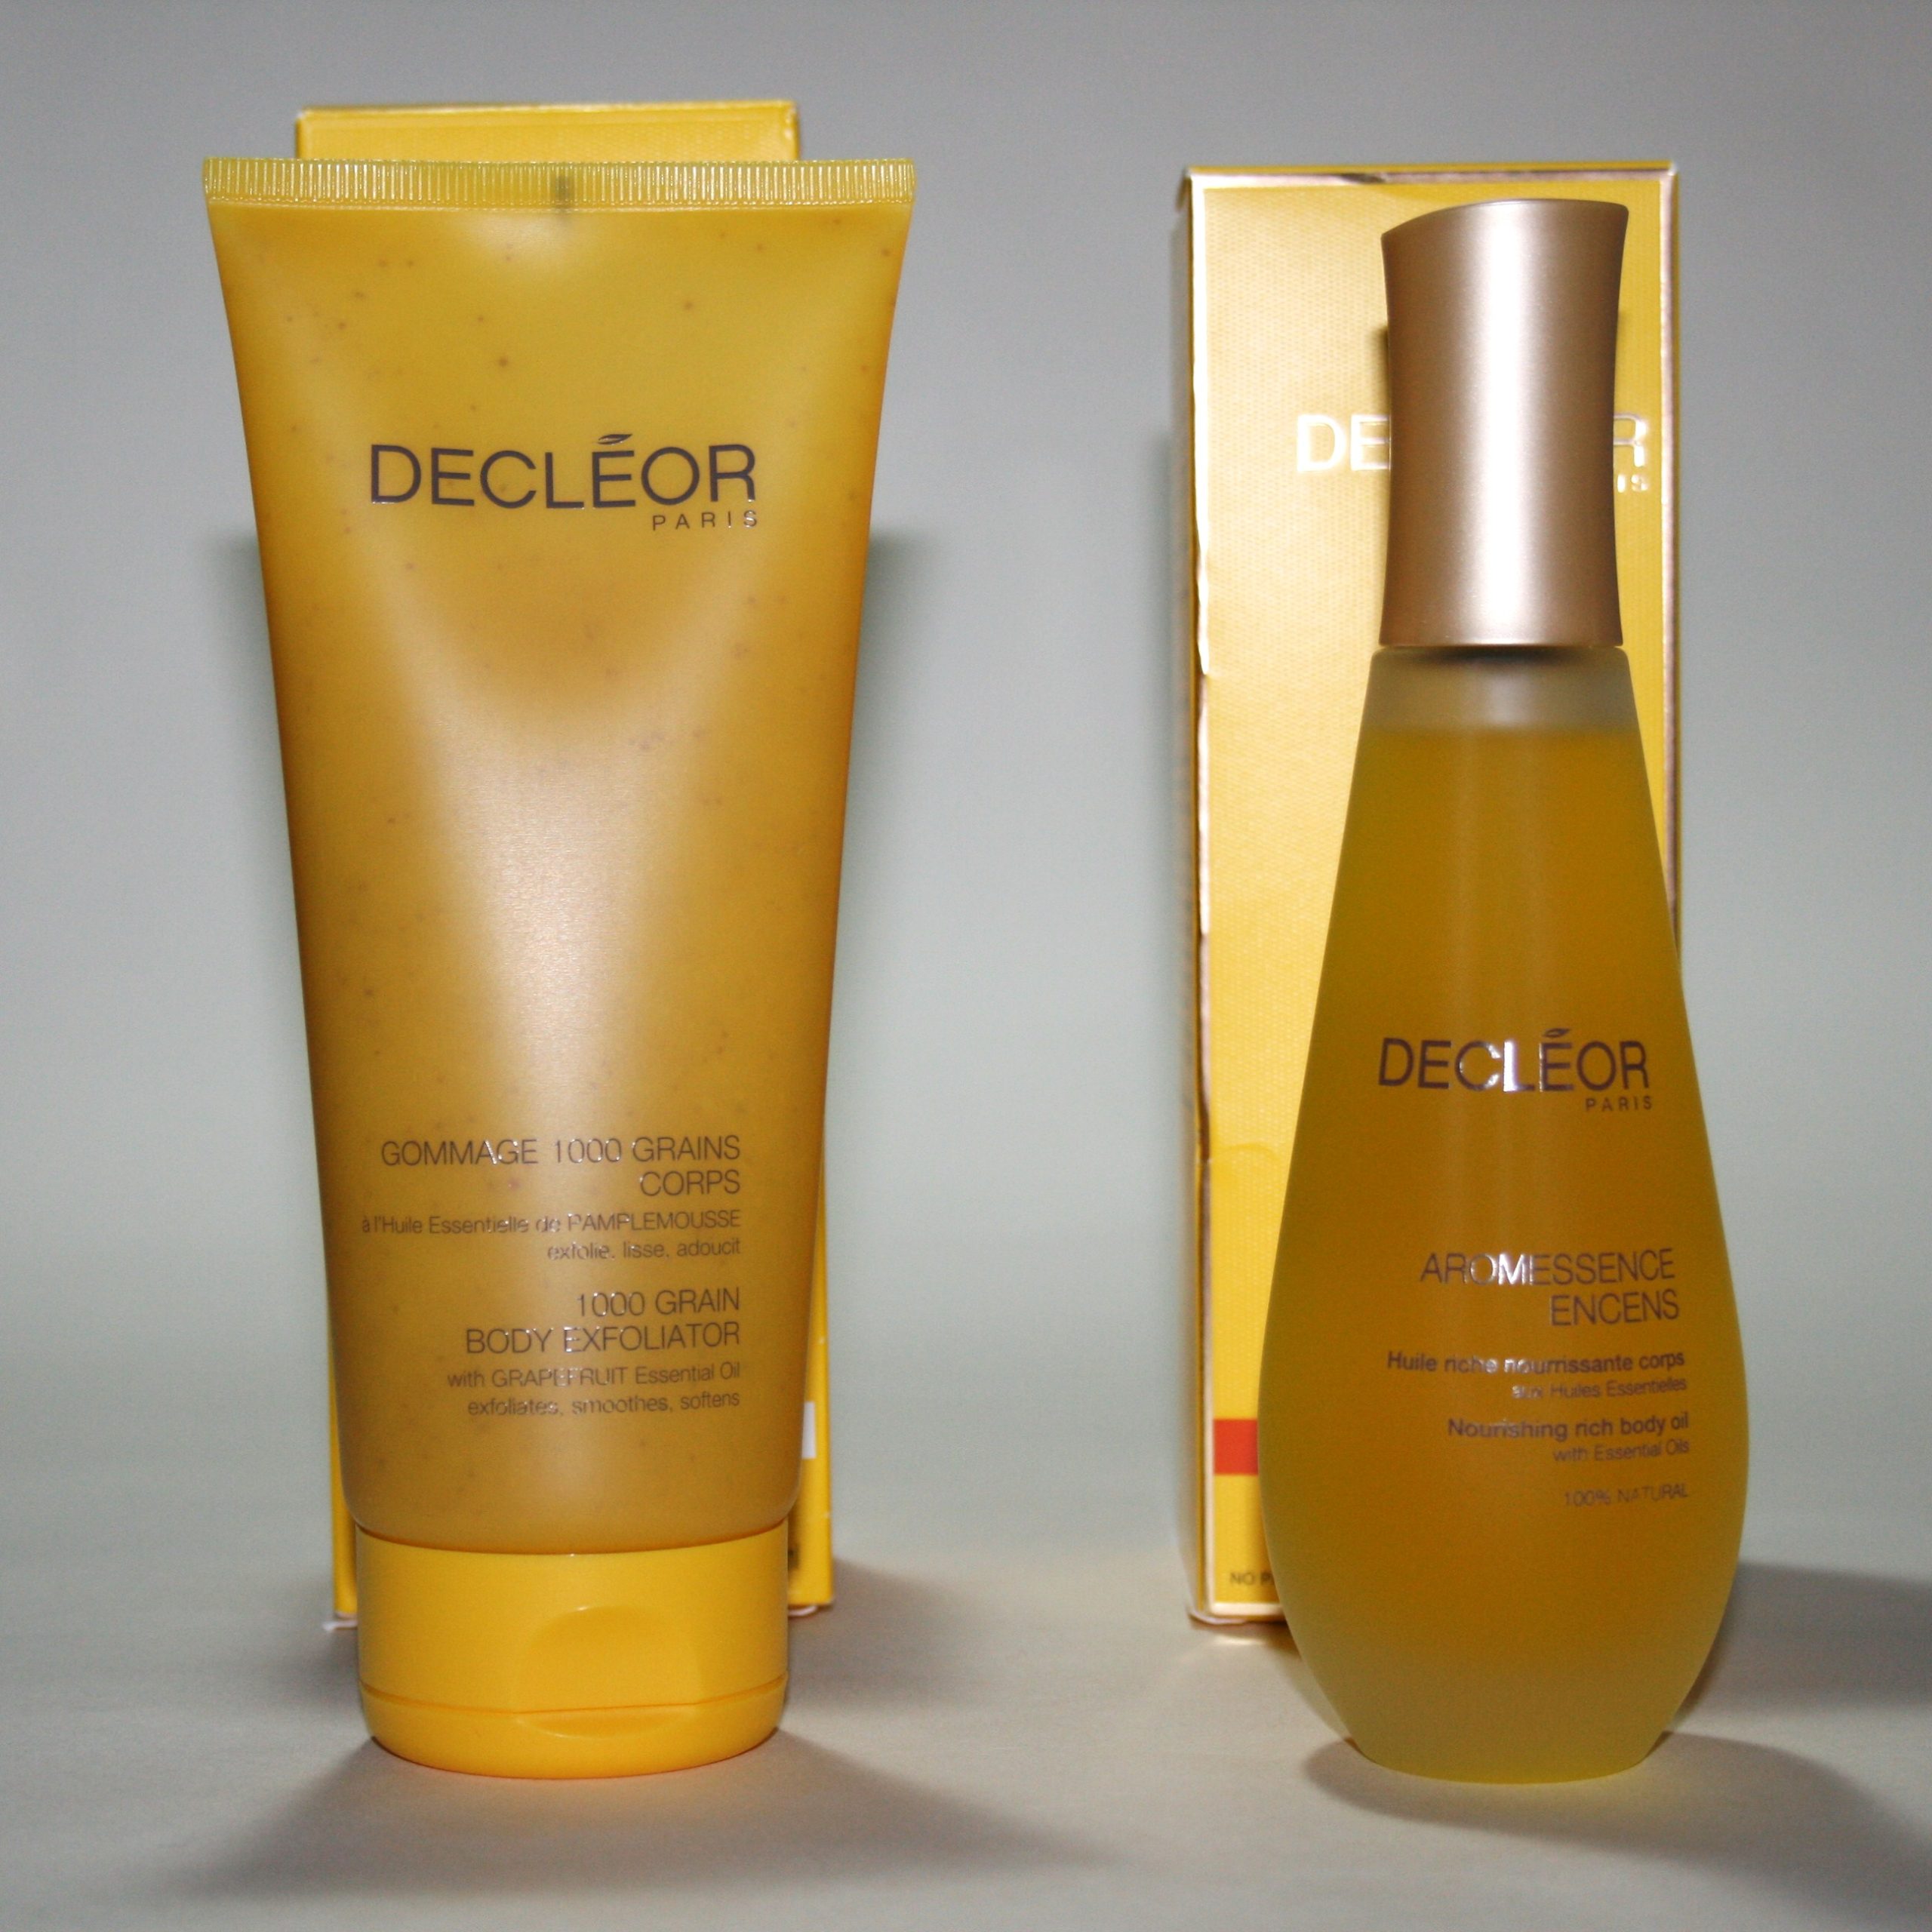 Decleor Aroma Nutrition 1000 Grain Body Exfoliator and Aromessence Encens Nourishing Rich Body Oil